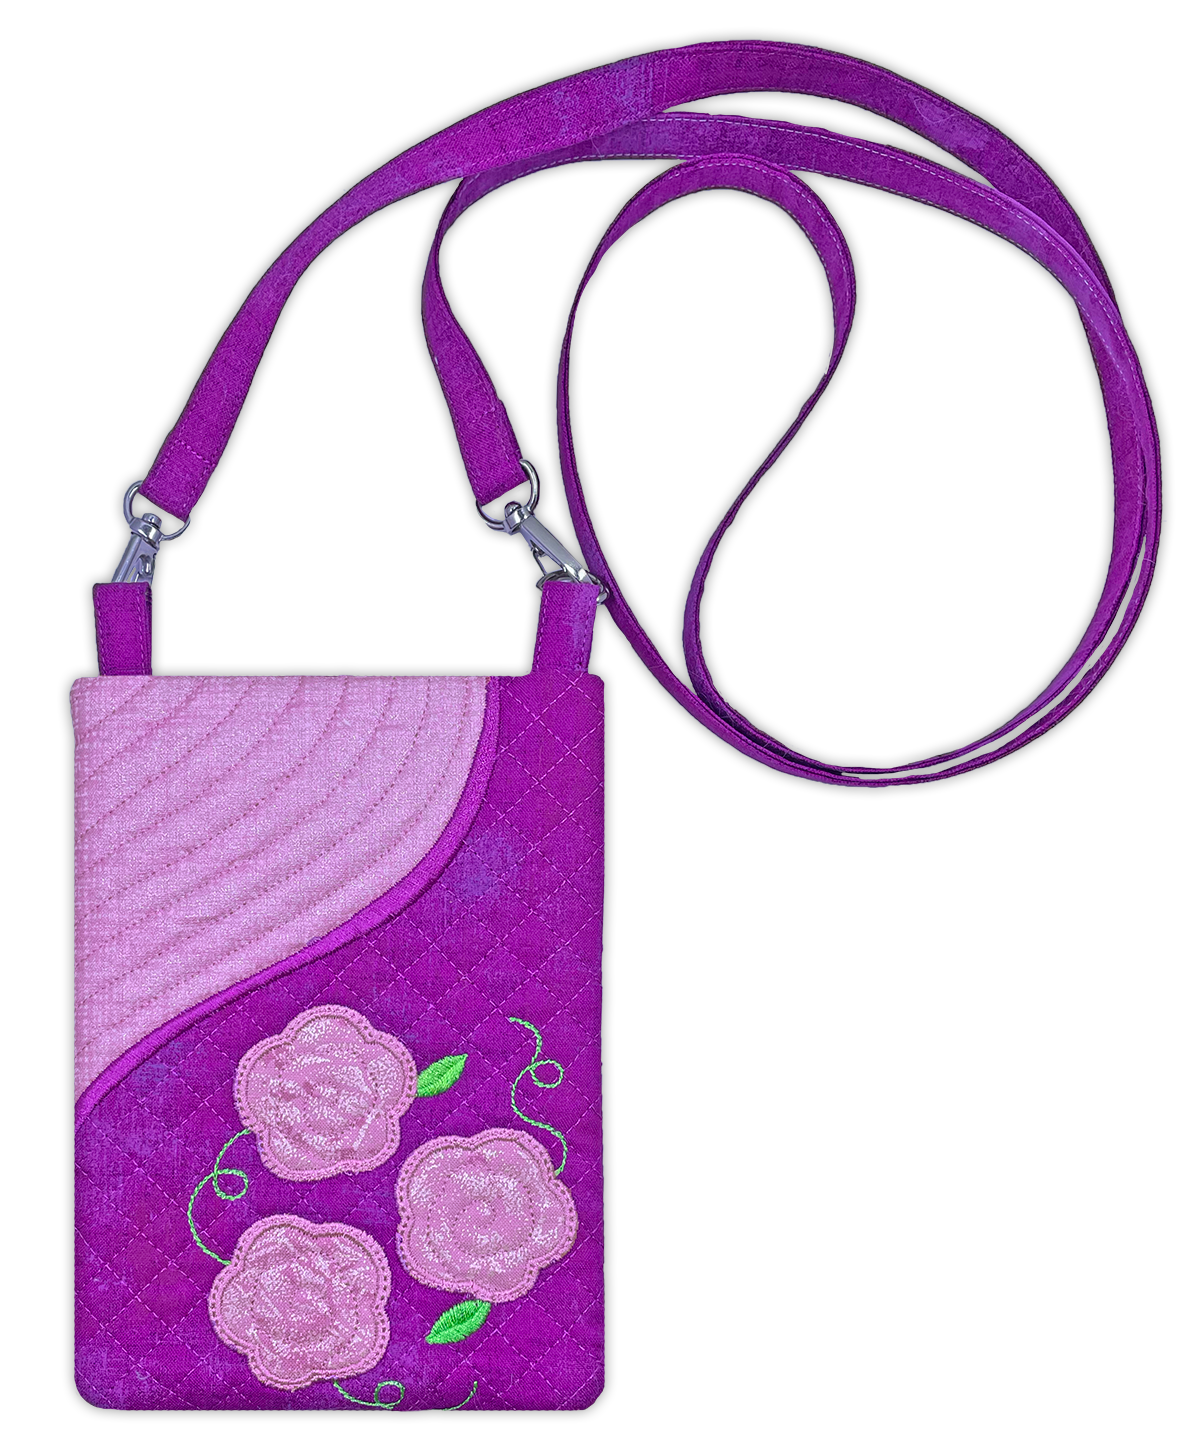 Posy Crossbody Bags In the Hoop Embroidery Design